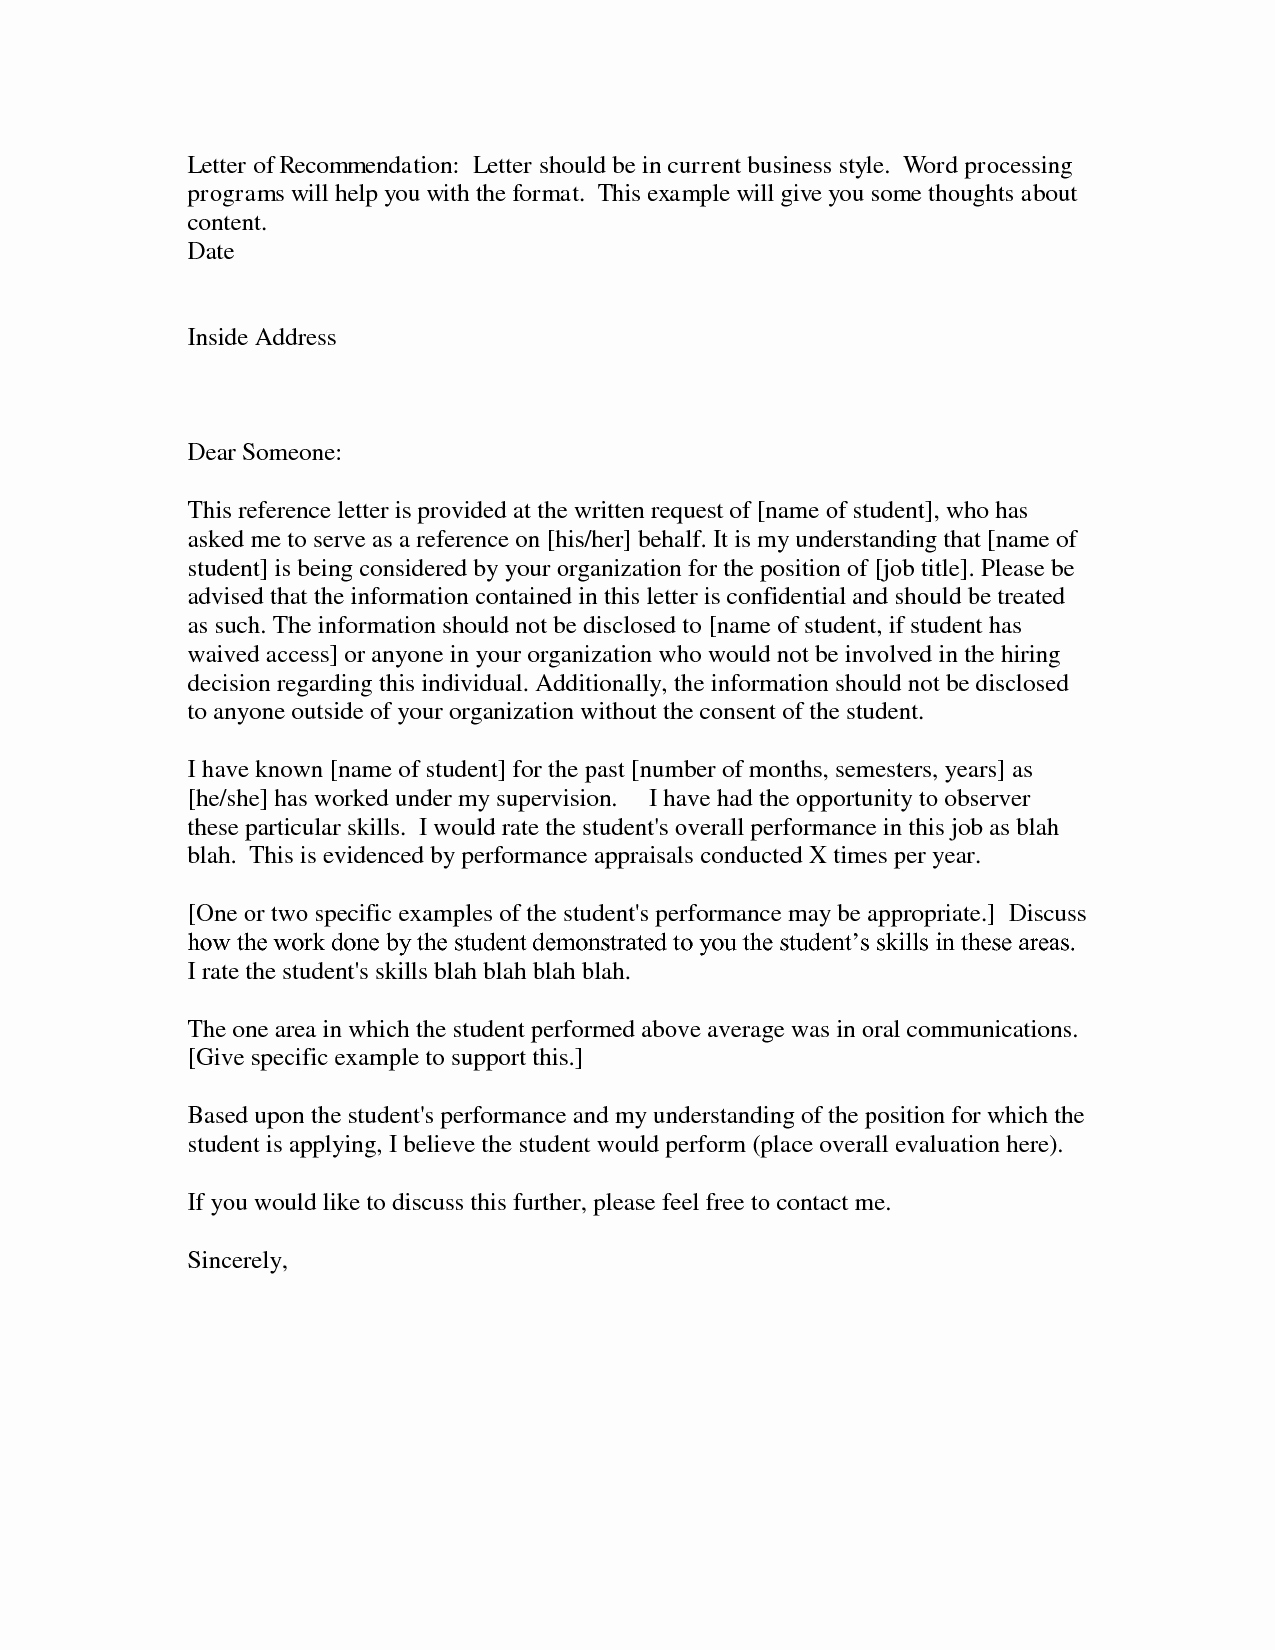 Letter Of Recommendation Request Example Beautiful Free Reference Letter Examplesexamples Of Reference